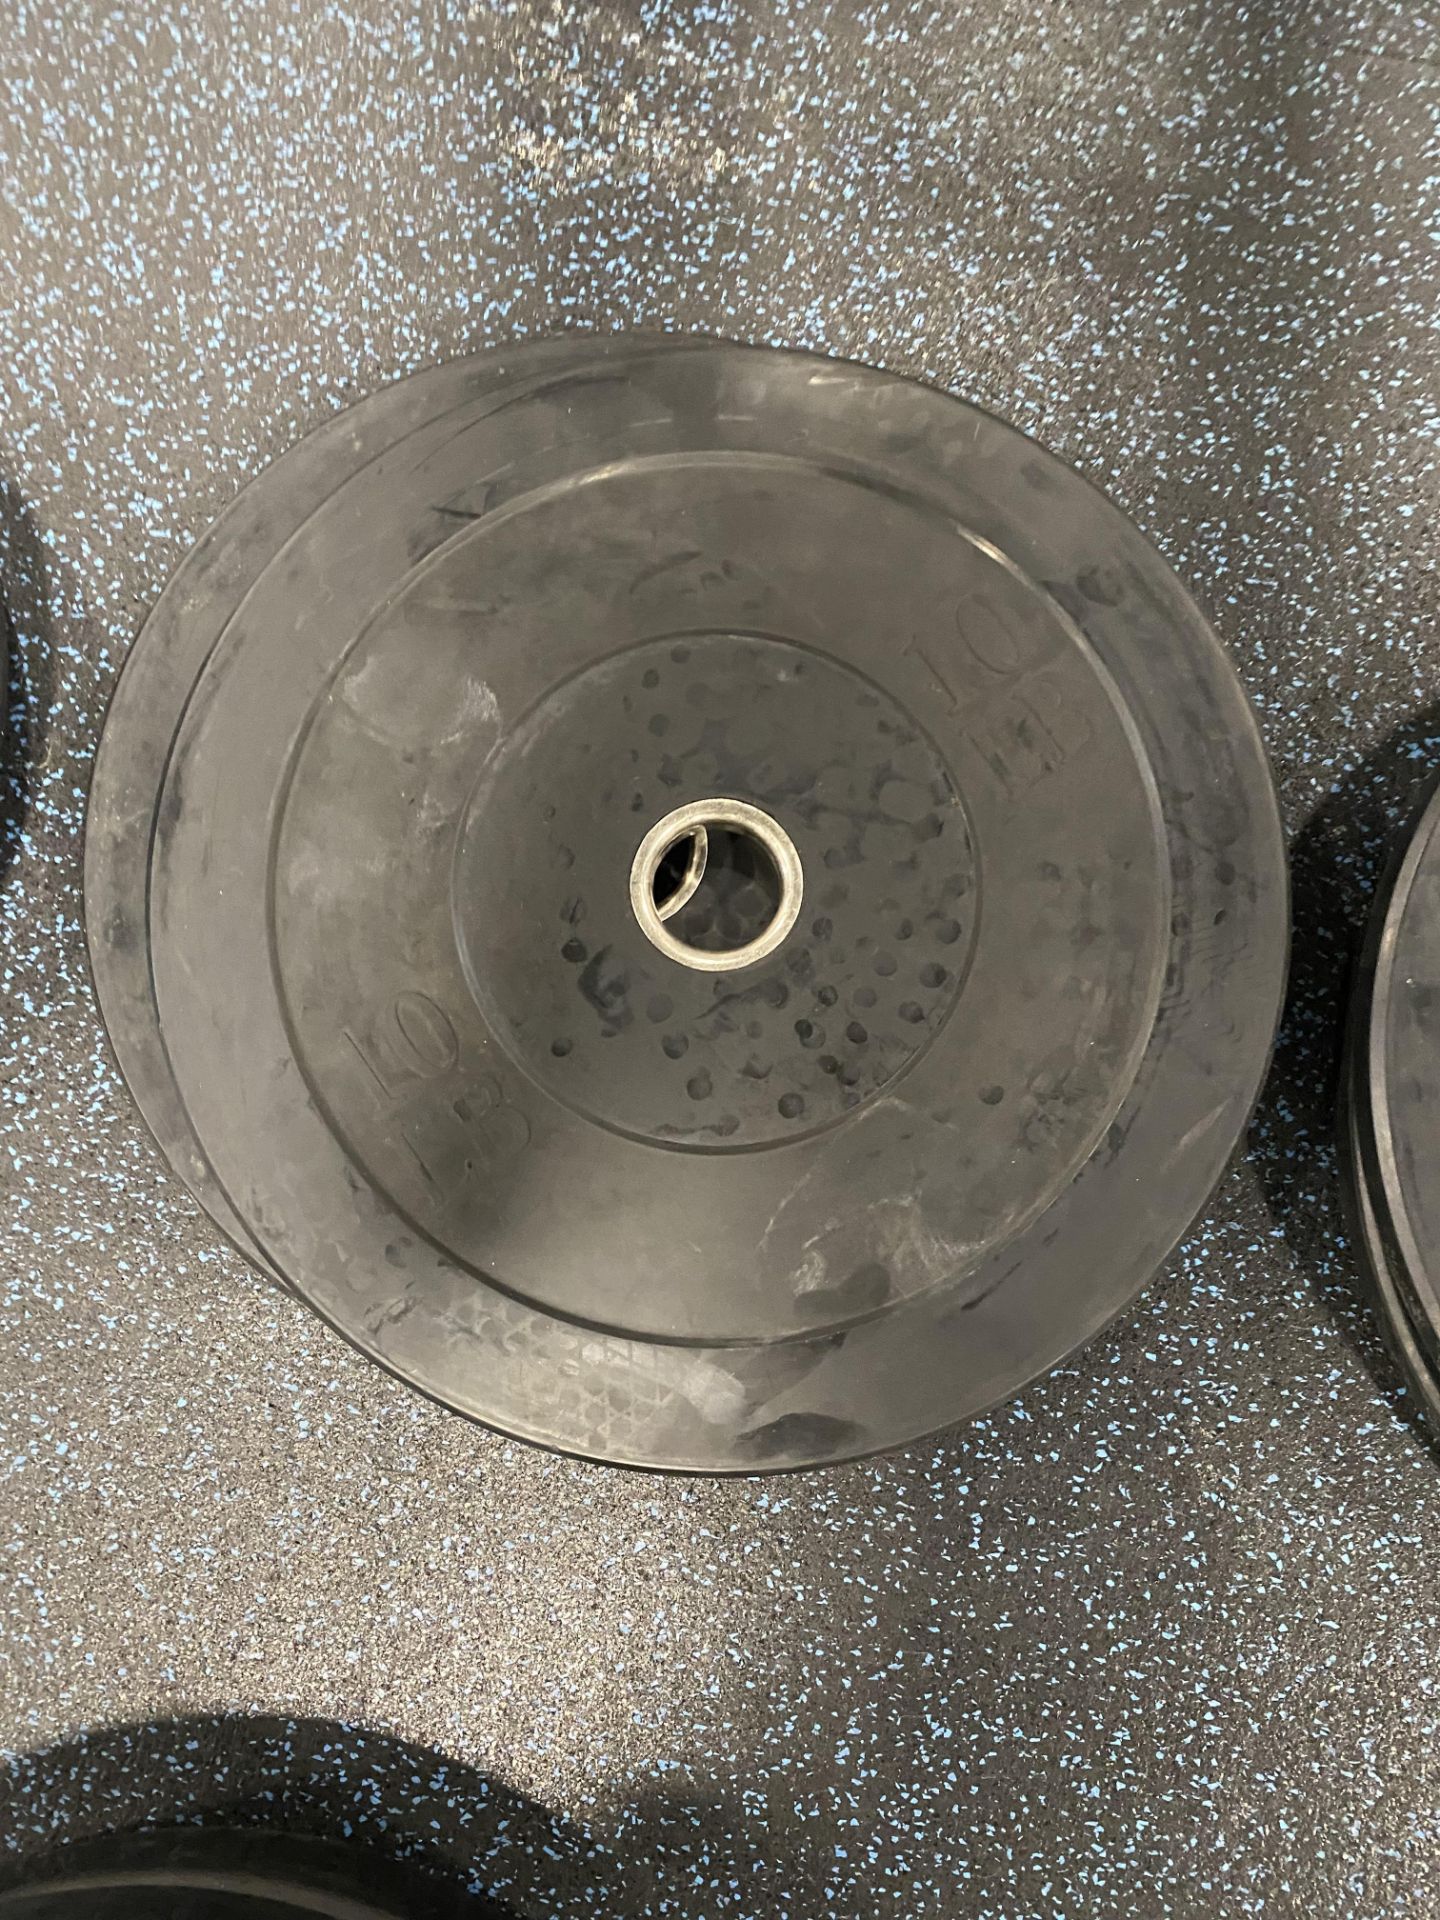 (Lot) (4) 45lb. Plates, (2) 25Lb Bumper Plates, and (2) 10lb Bumper Plates - Image 5 of 5